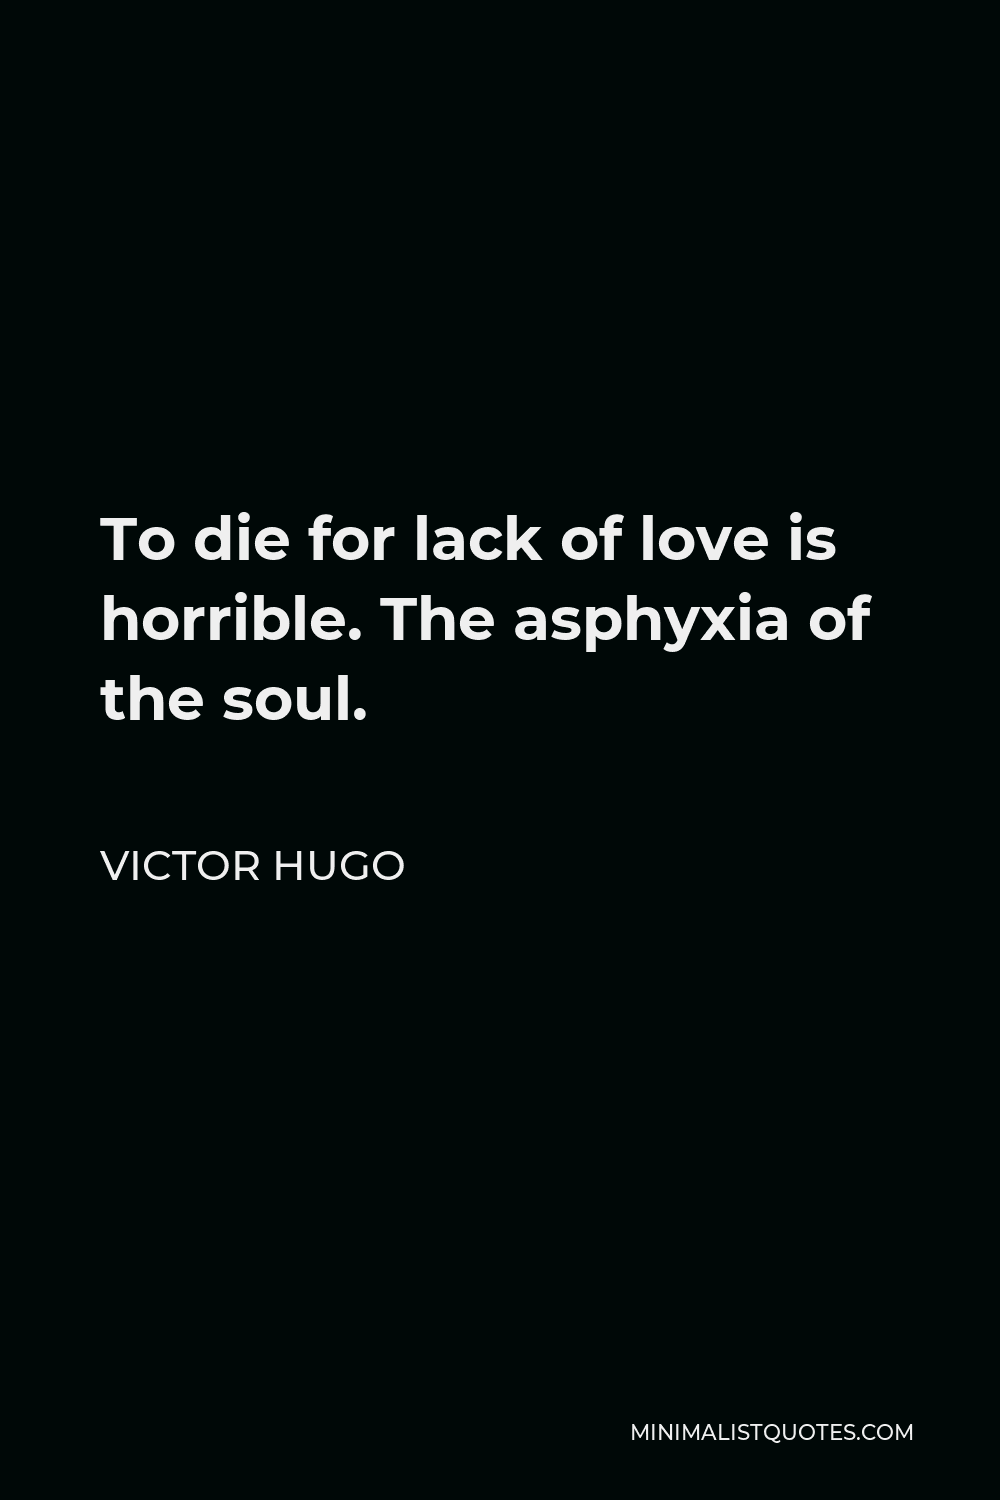 Victor Hugo Quote - To die for lack of love is horrible. The asphyxia of the soul.